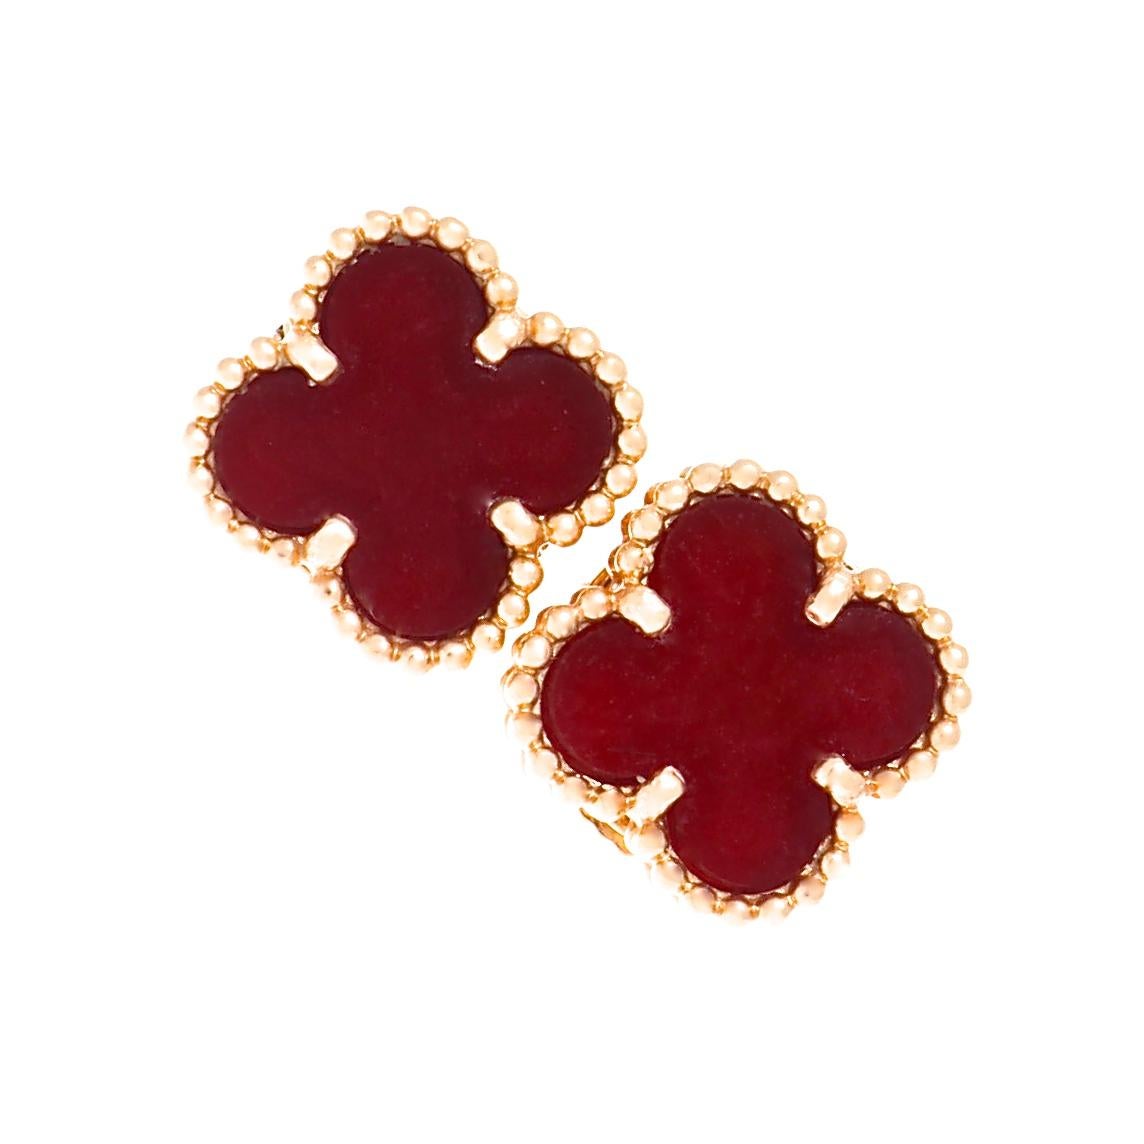 The iconic Alhambra motif from Van Cleef & Arpels, in rich carnelian, set in 18k rose gold. A true symbol of luck and good fortune, expressing continuity and legacy. Since its inception in 1960's Paris, the Alhambra line has captured the hearts of